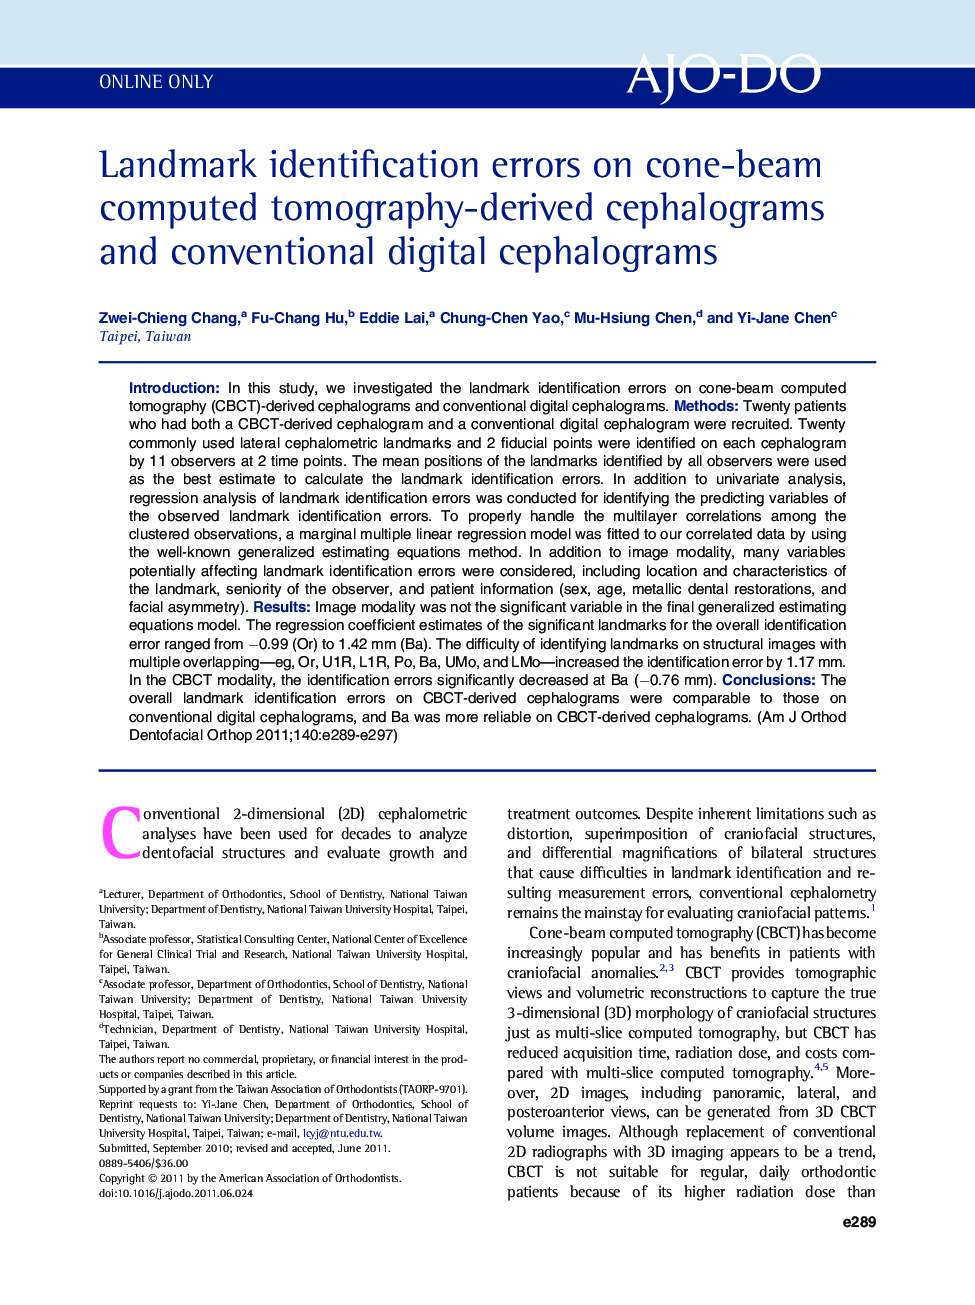 Landmark identification errors on cone-beam computed tomography-derived cephalograms and conventional digital cephalograms 